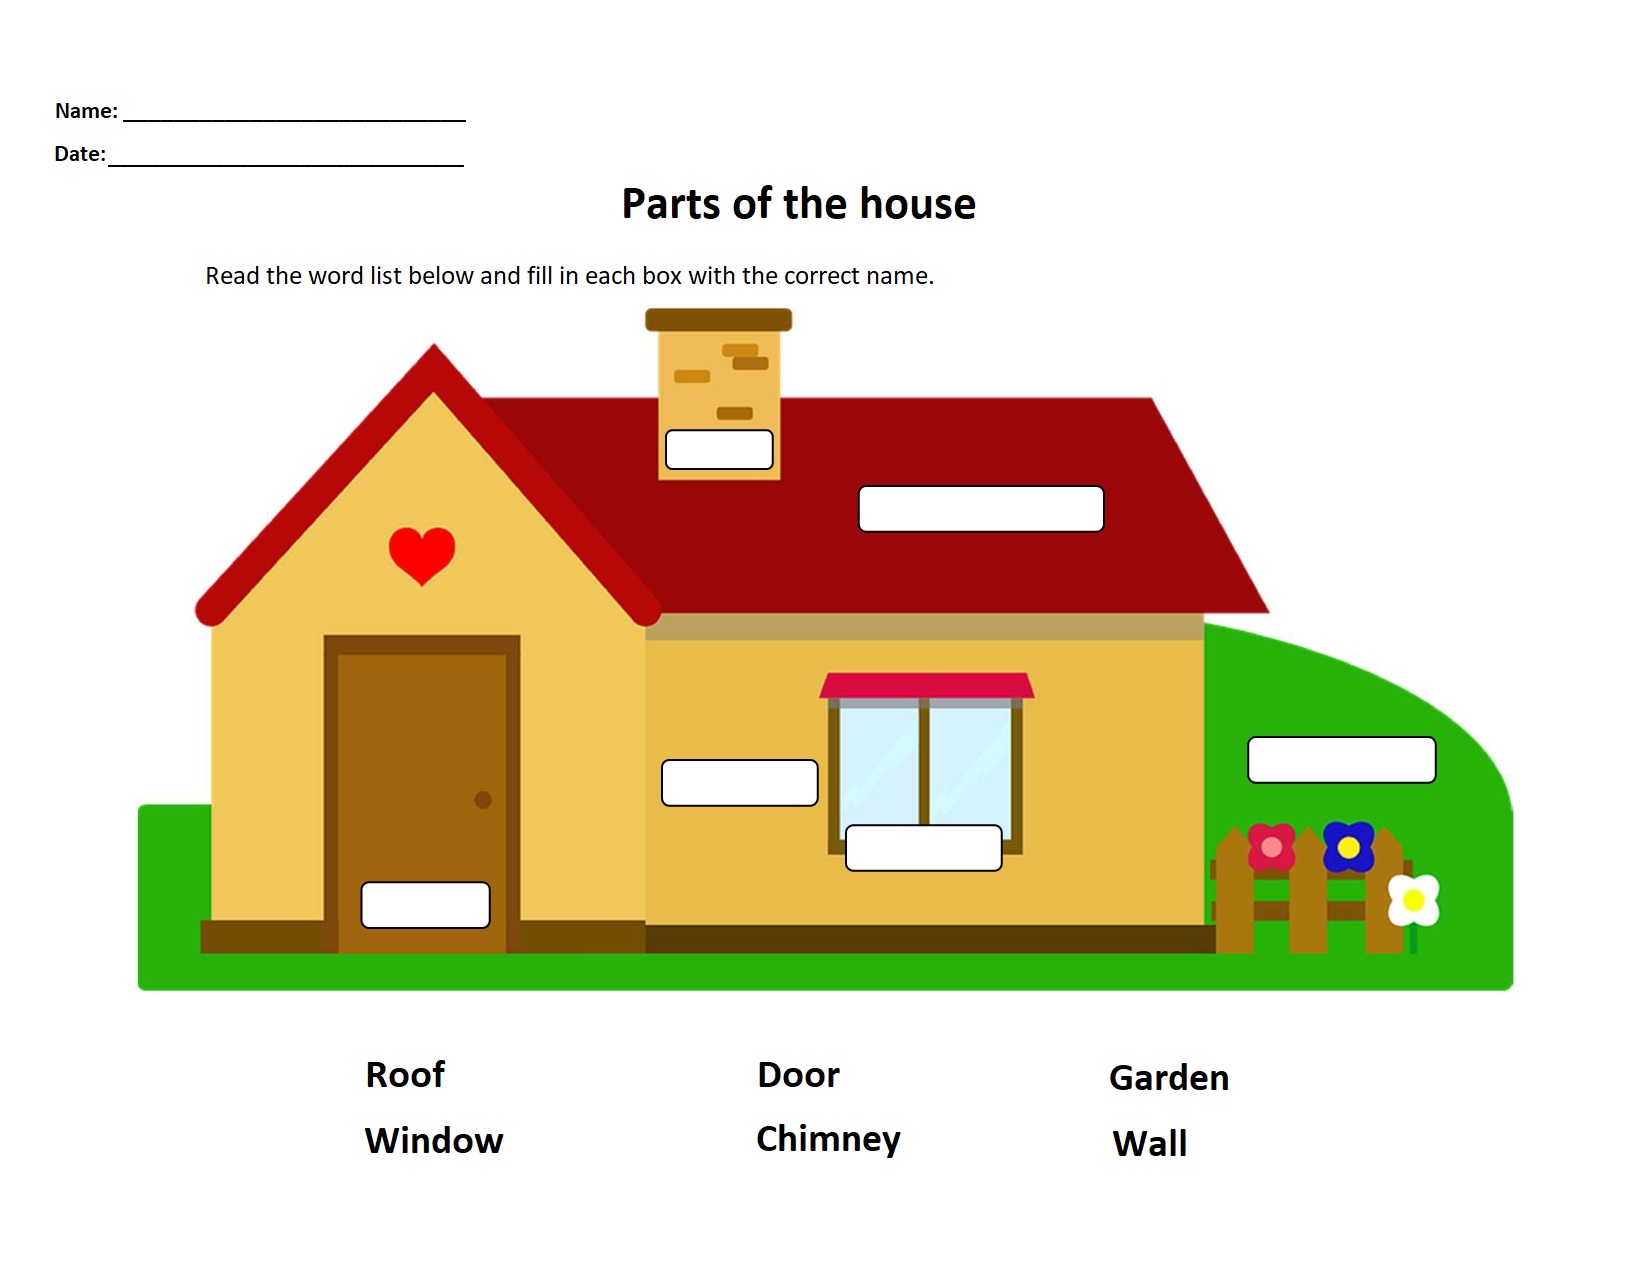 Parts of the house.jpg